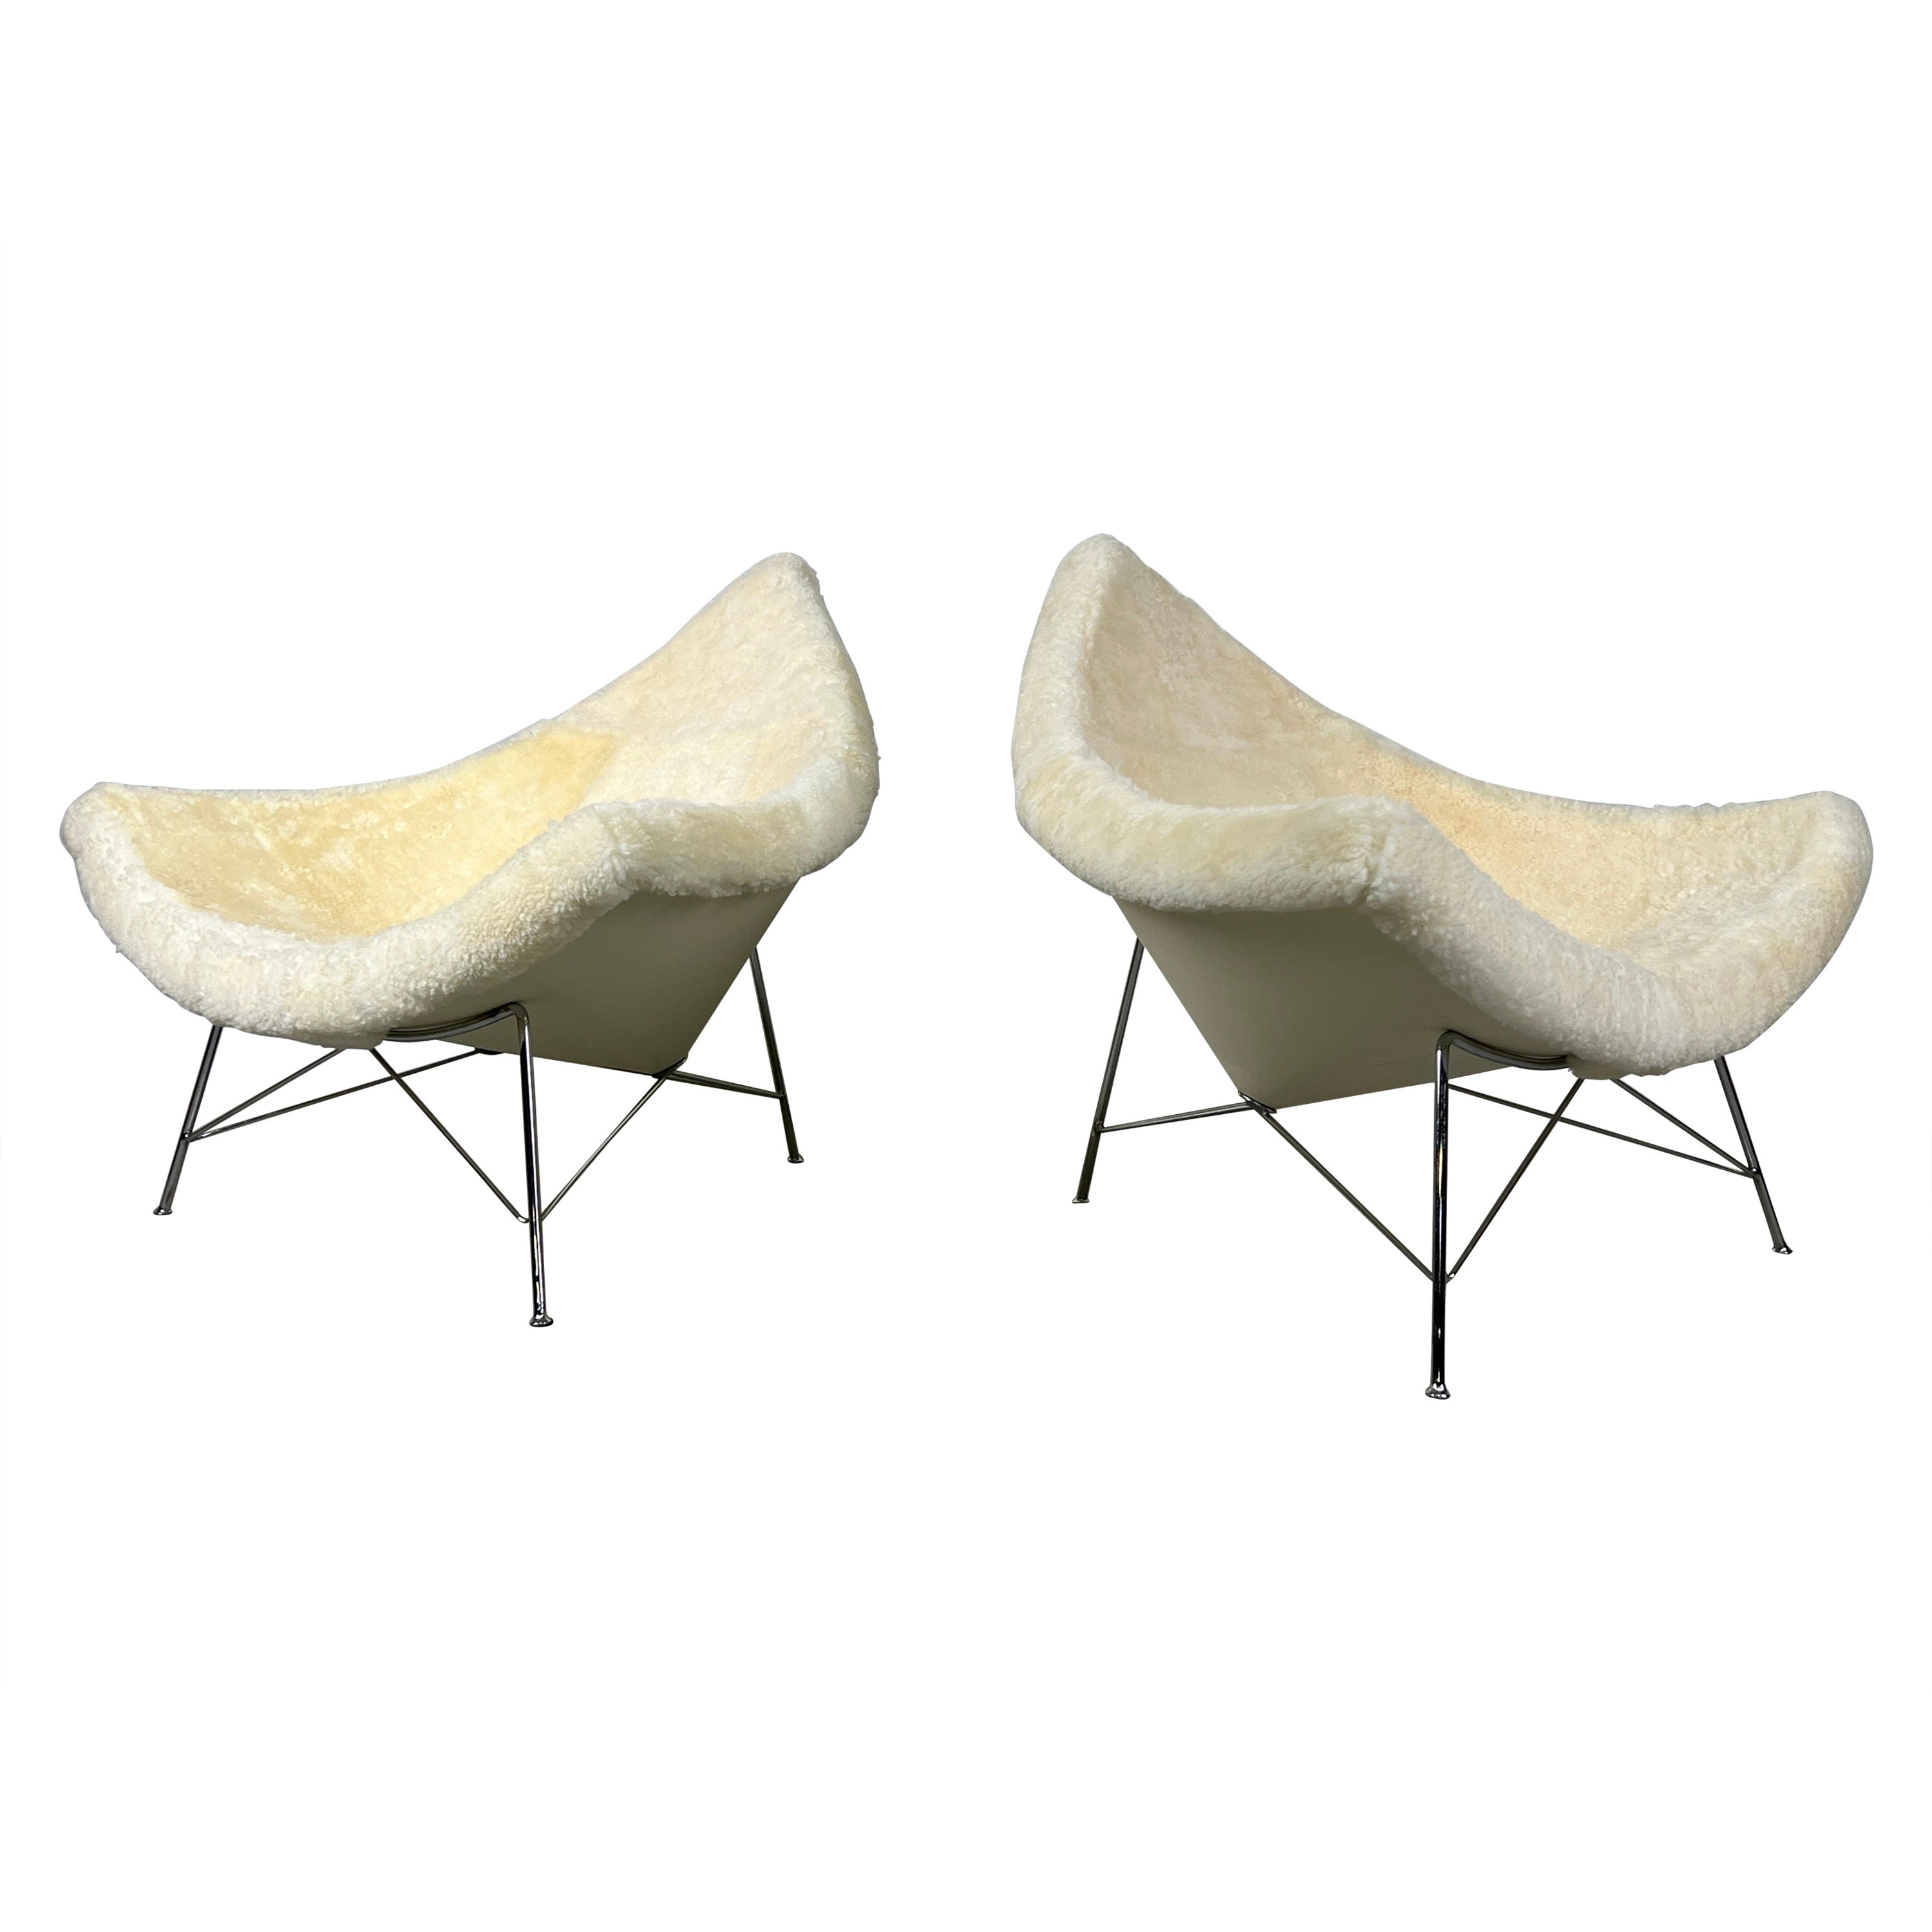 Pair of Early Coconut Chairs by George Nelson for Herman Miller in Shearling  For Sale